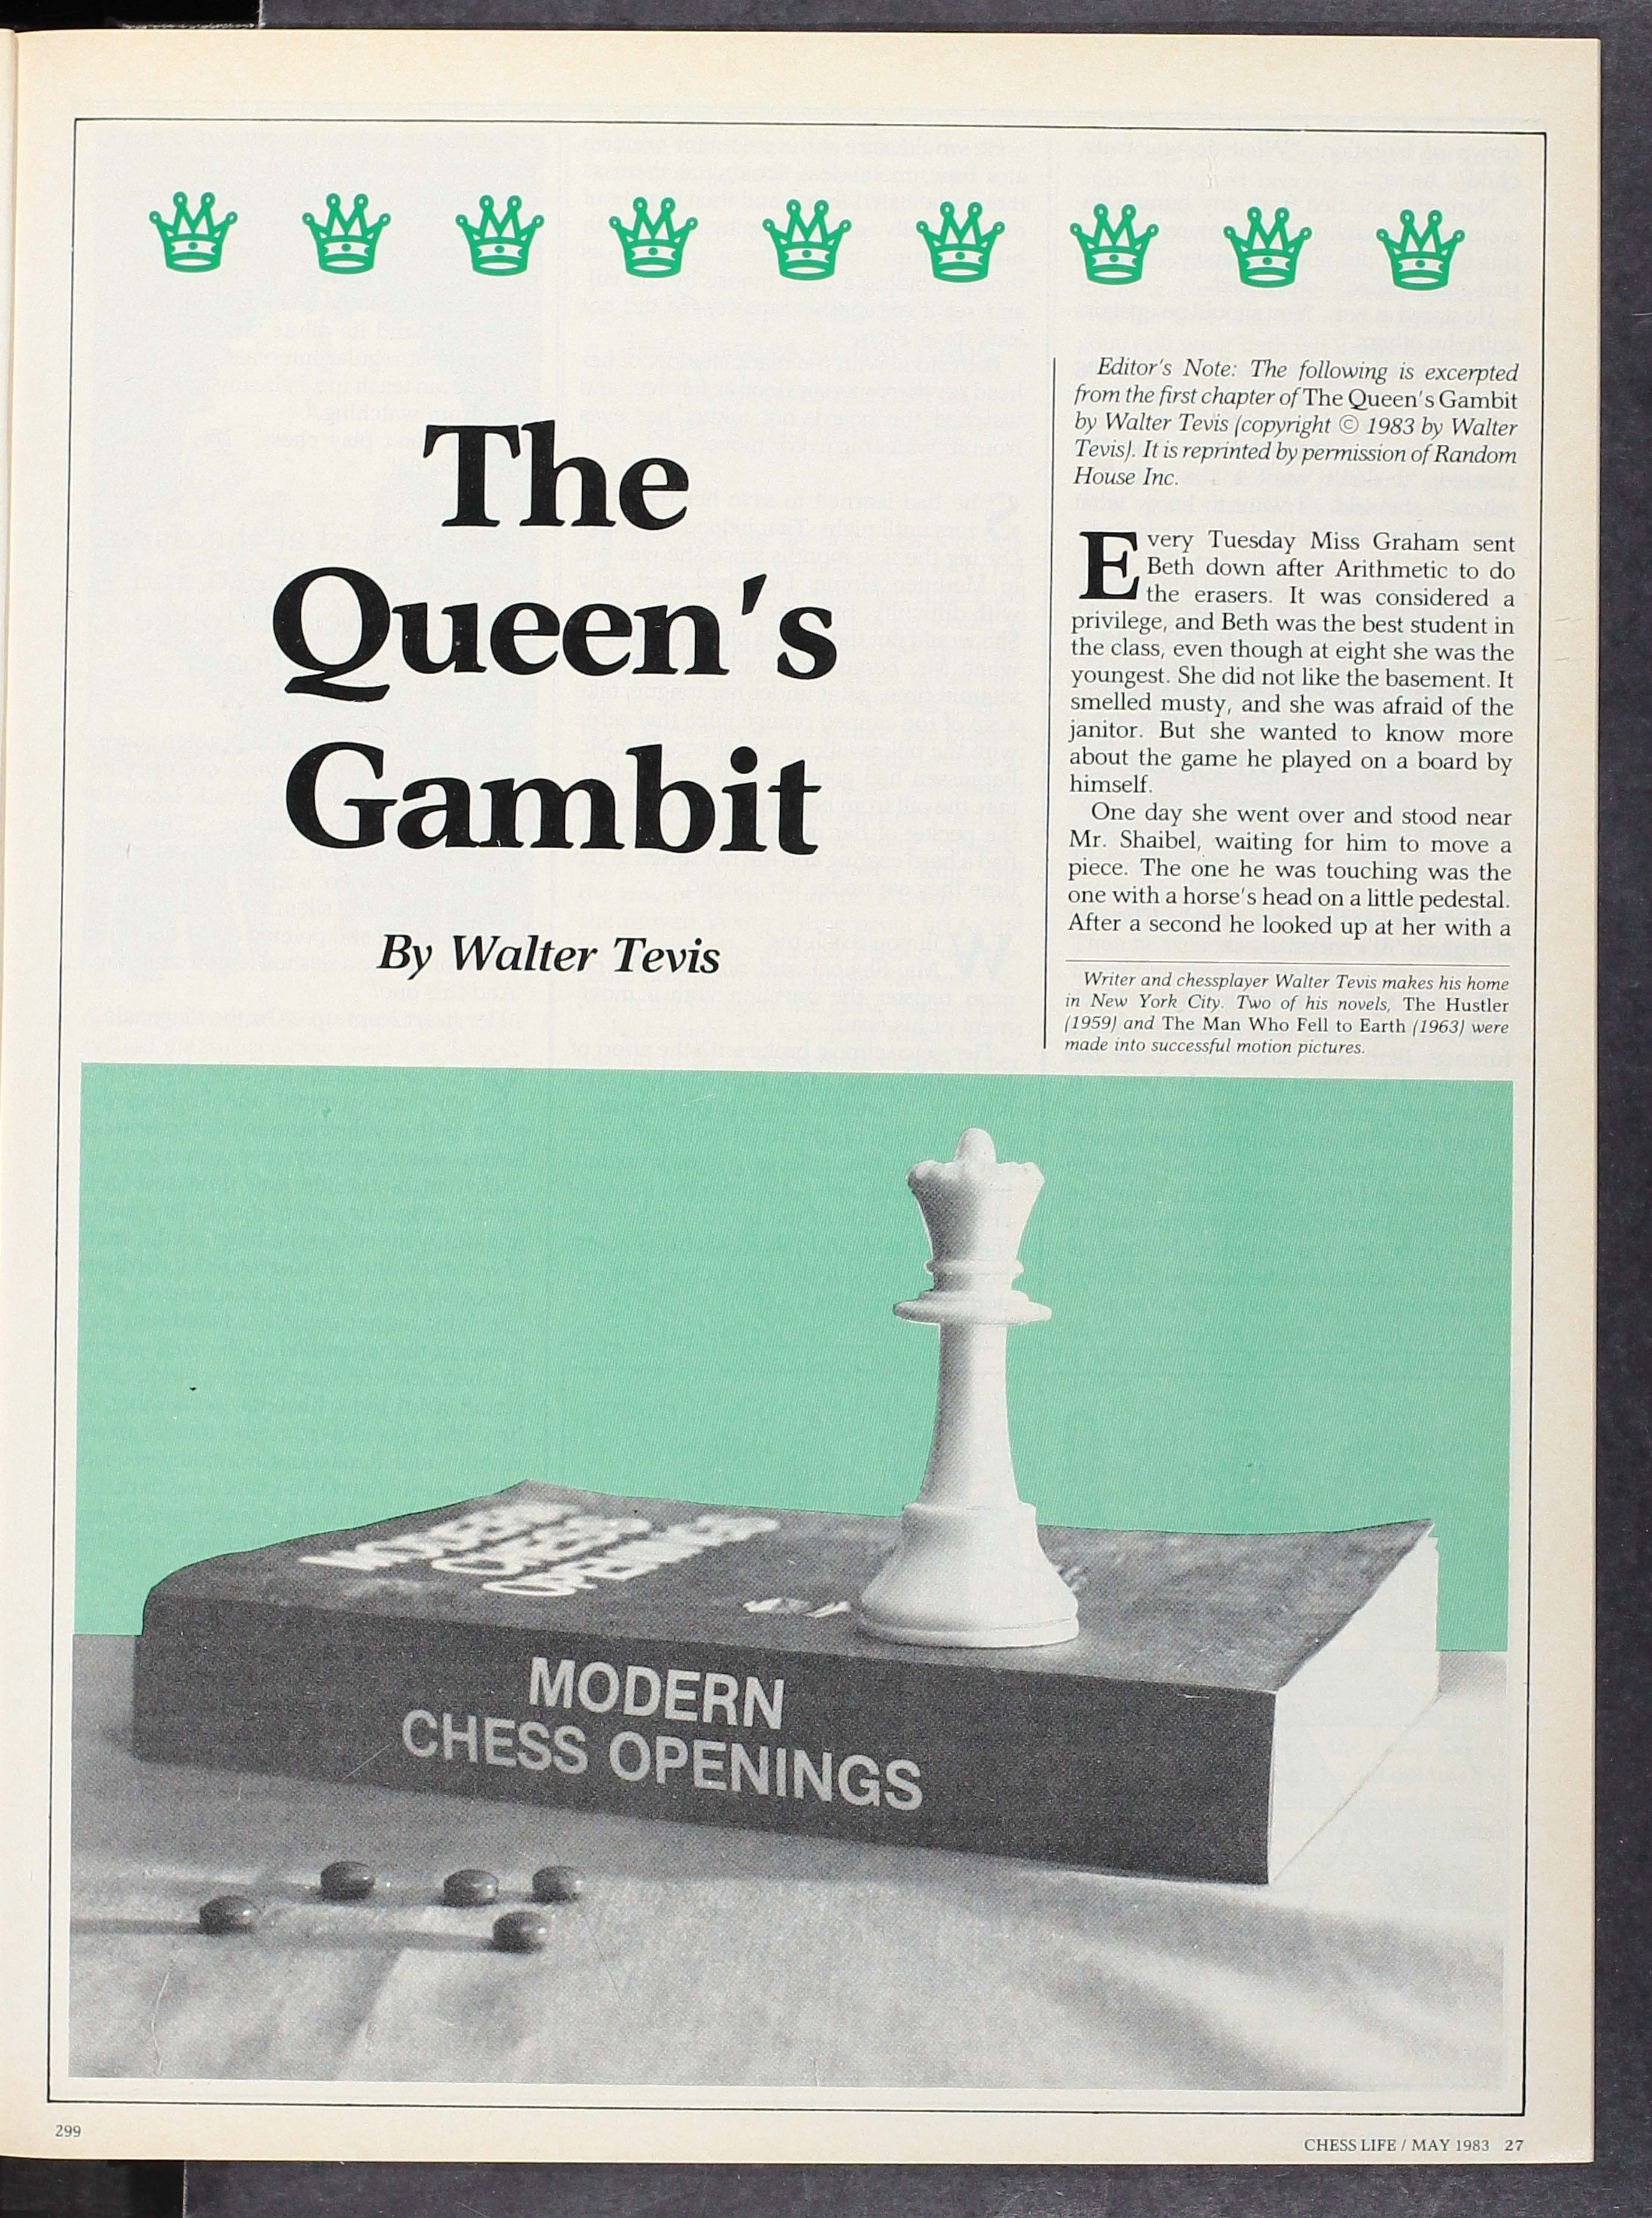 The Queen's Gambit on Netflix: how it changed Walter Tevis' 1983 novel,  which is not a true story.